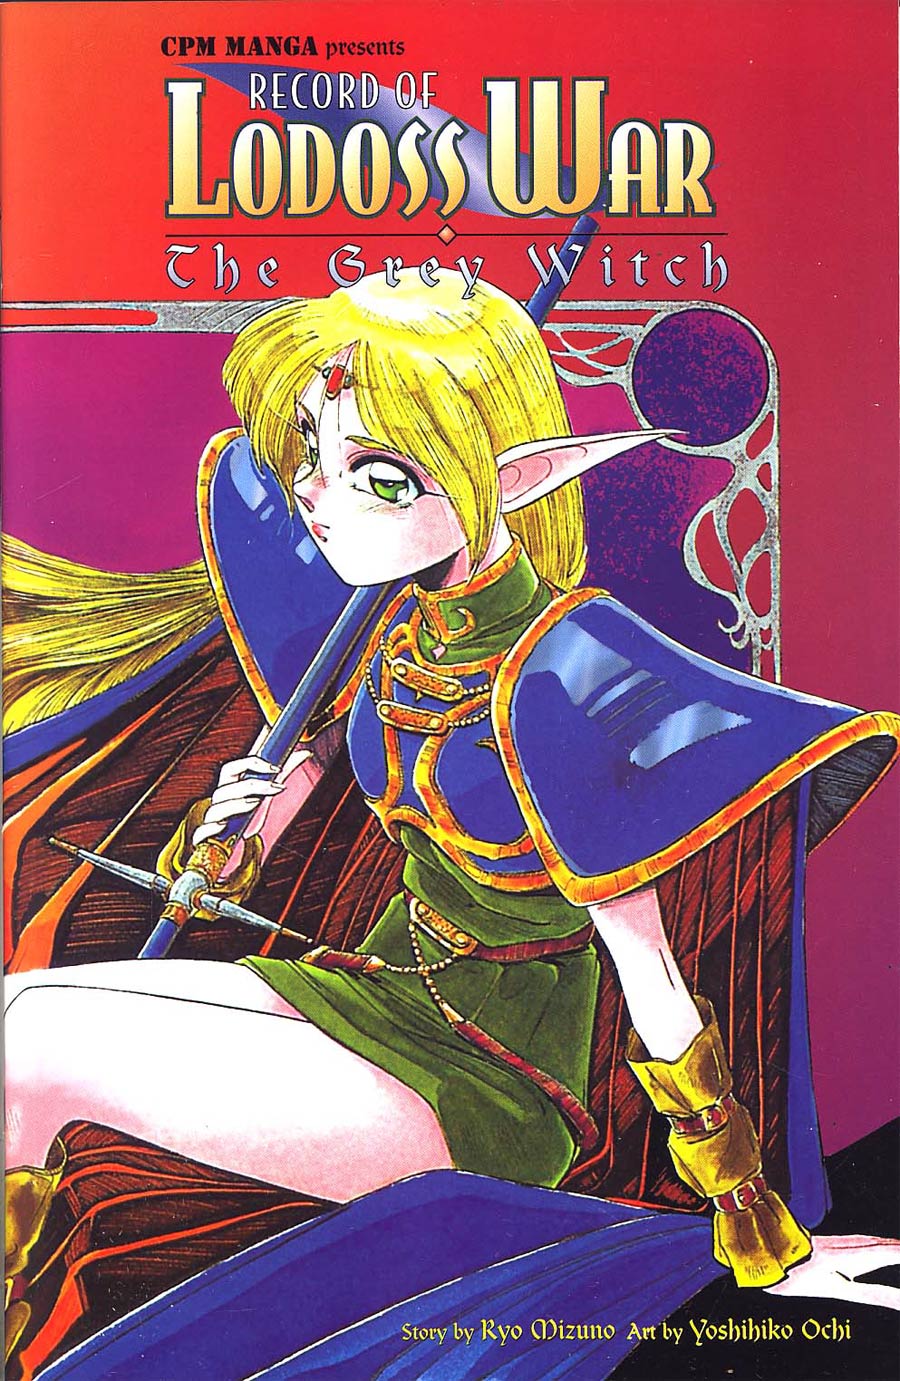 Record Of Lodoss War The Grey Witch #3